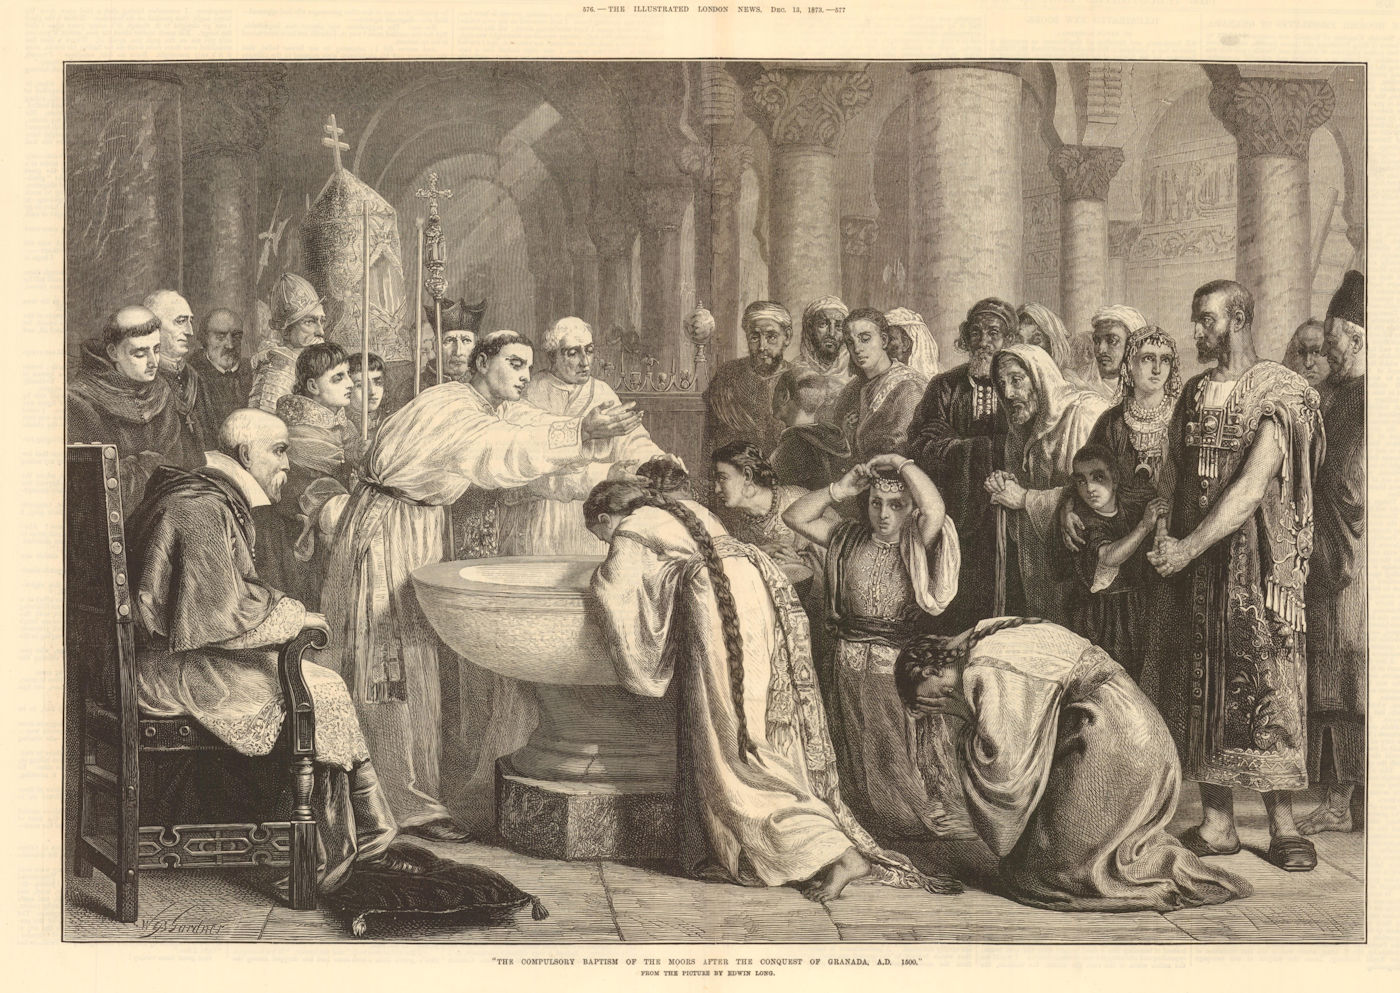 Associate Product Compulsory baptism of the Moors after the conquest of Granada. Edwin Long 1873